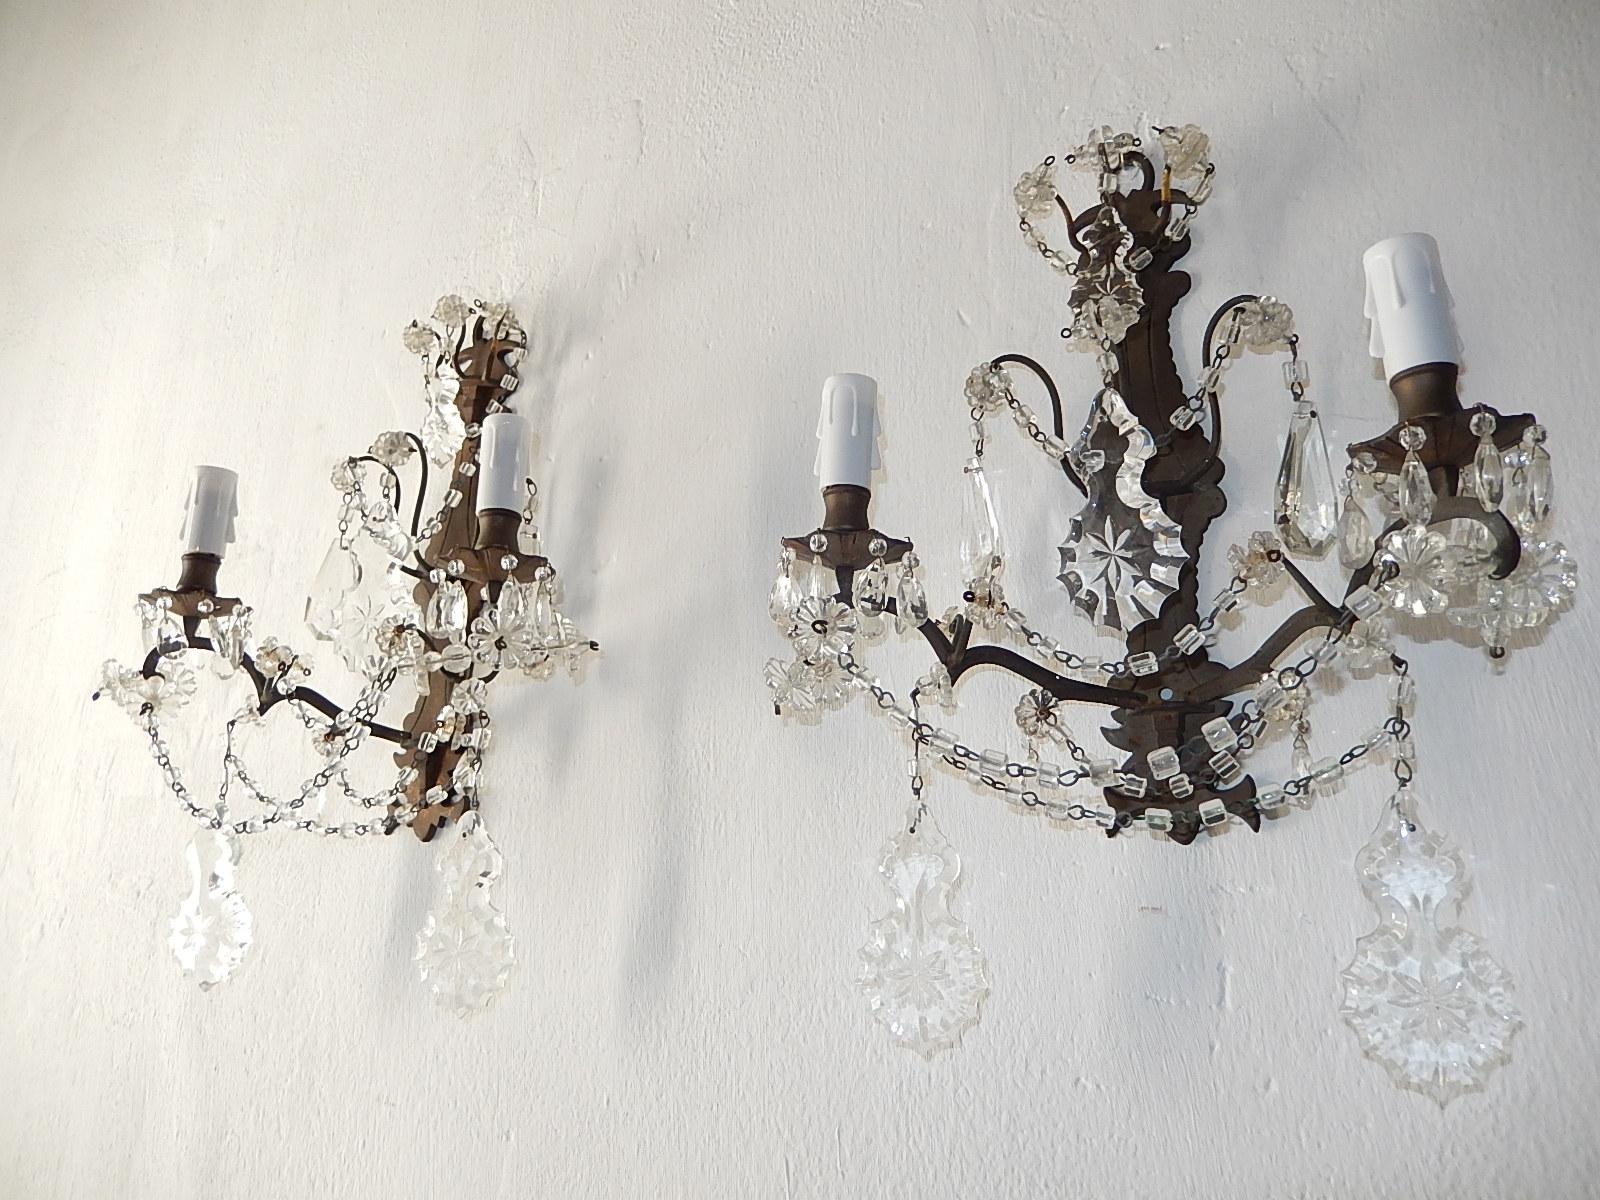 Housing two lights each. Rewired and ready to hang. Bronze body with perfect patina. Swags of macaroni beads and florets throughout. Adorning cut crystal prisms with stars in centre. Free priority shipping from Italy.